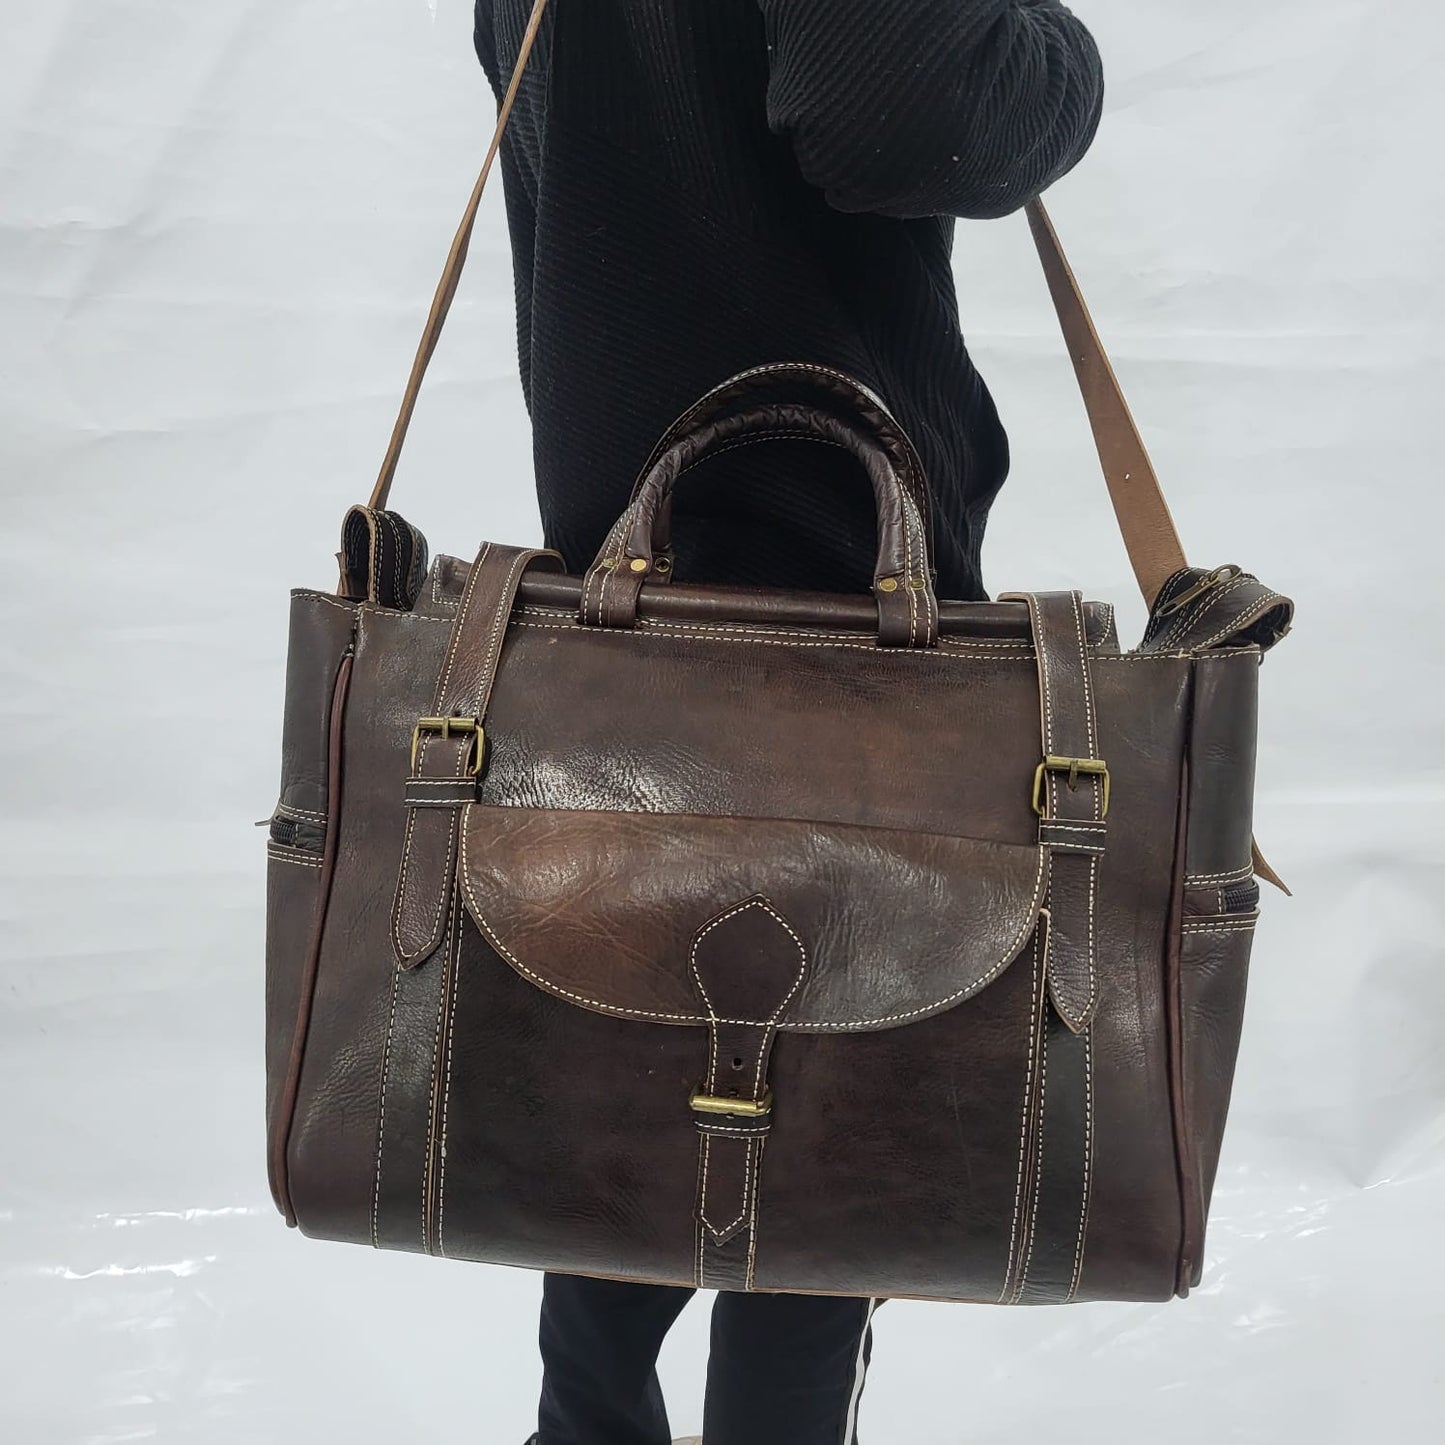 Artisanal Moroccan Leather Travel Bags Crafted Specifically for Men